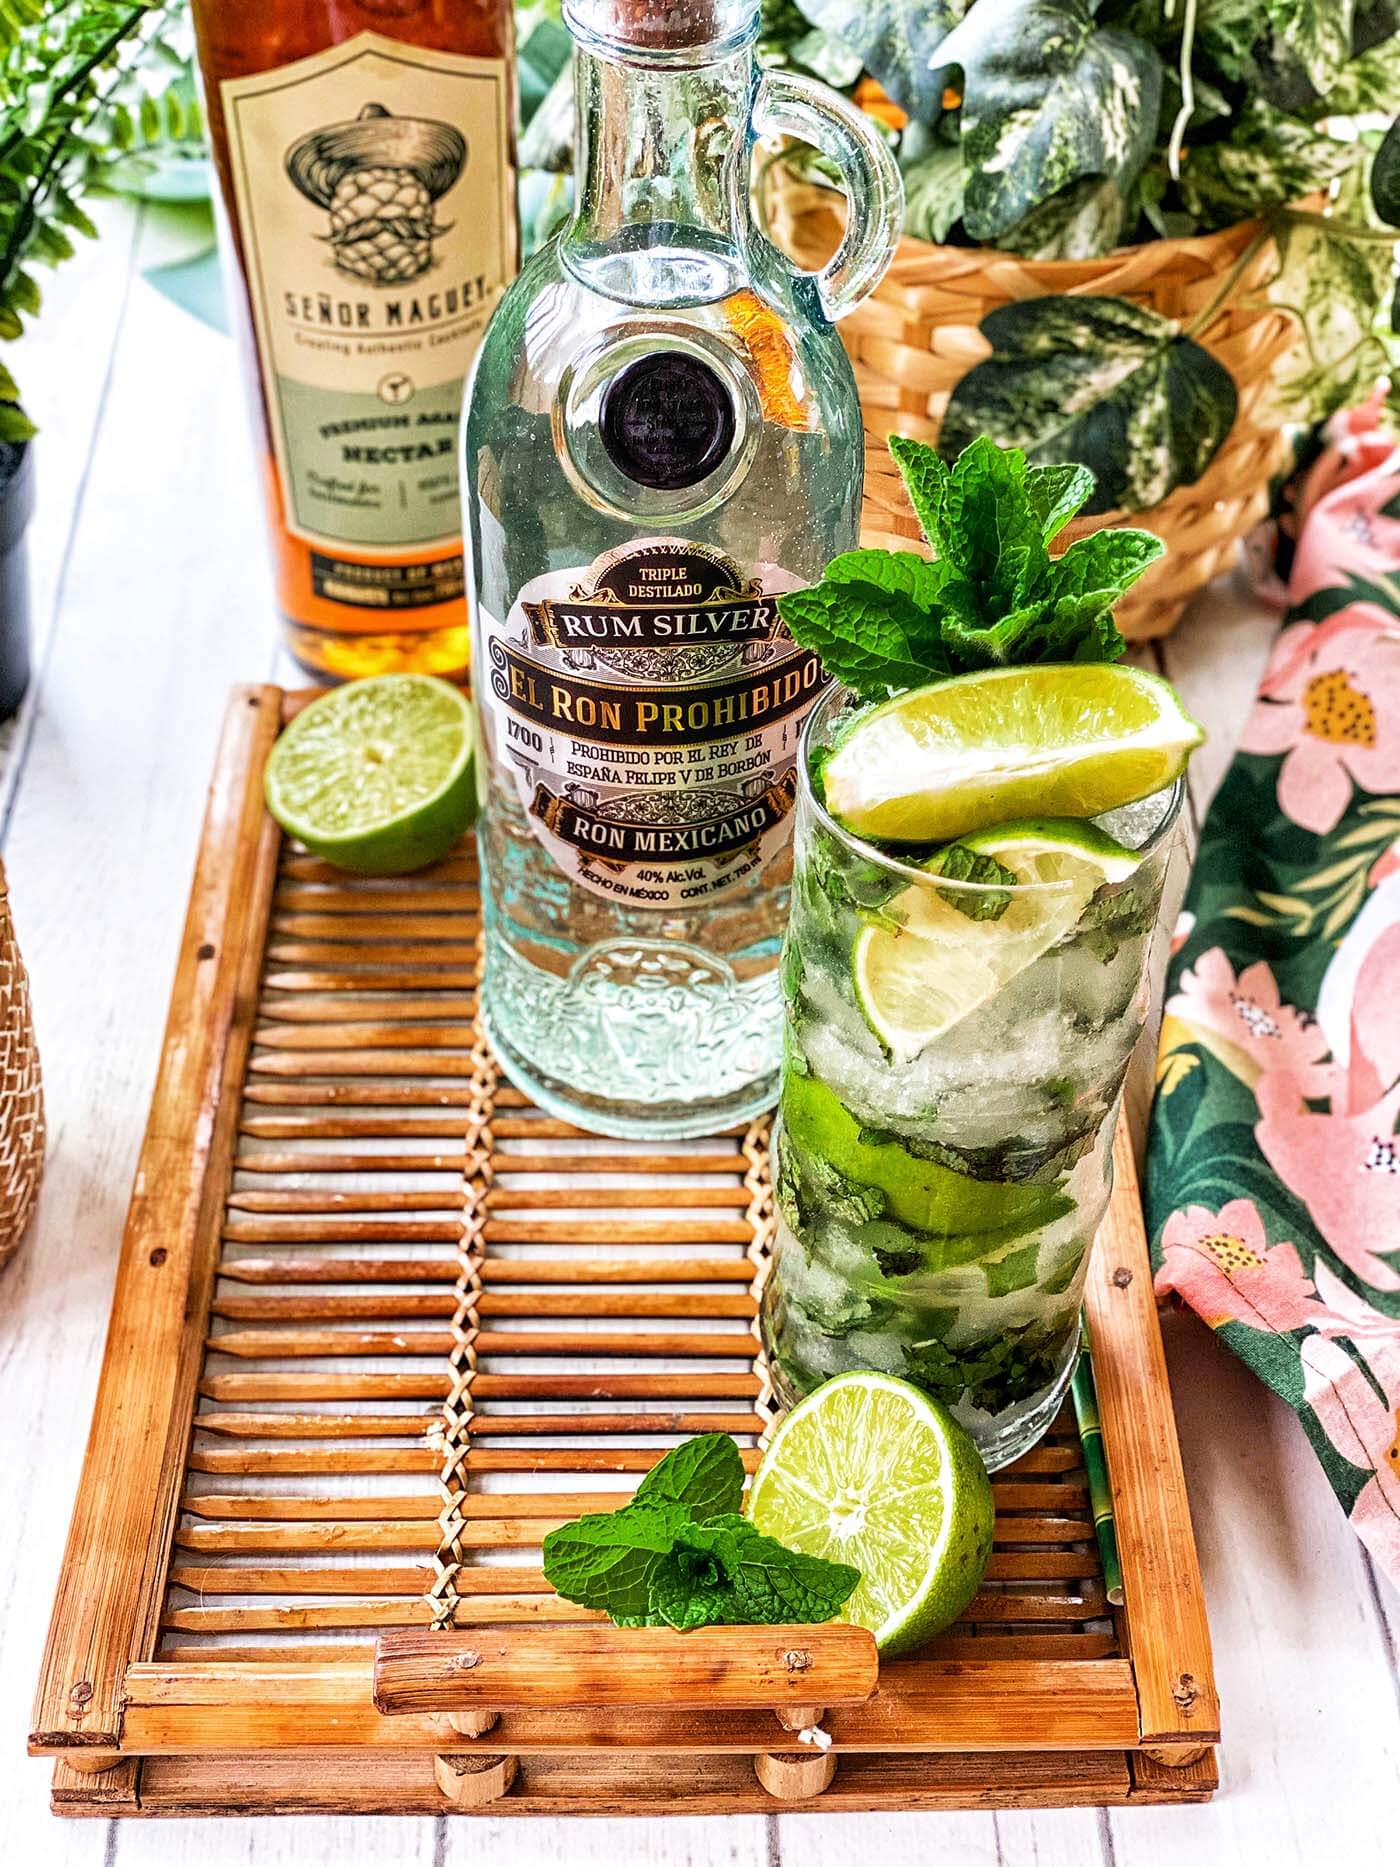 Product image for “Mojito Cocktail Kit”